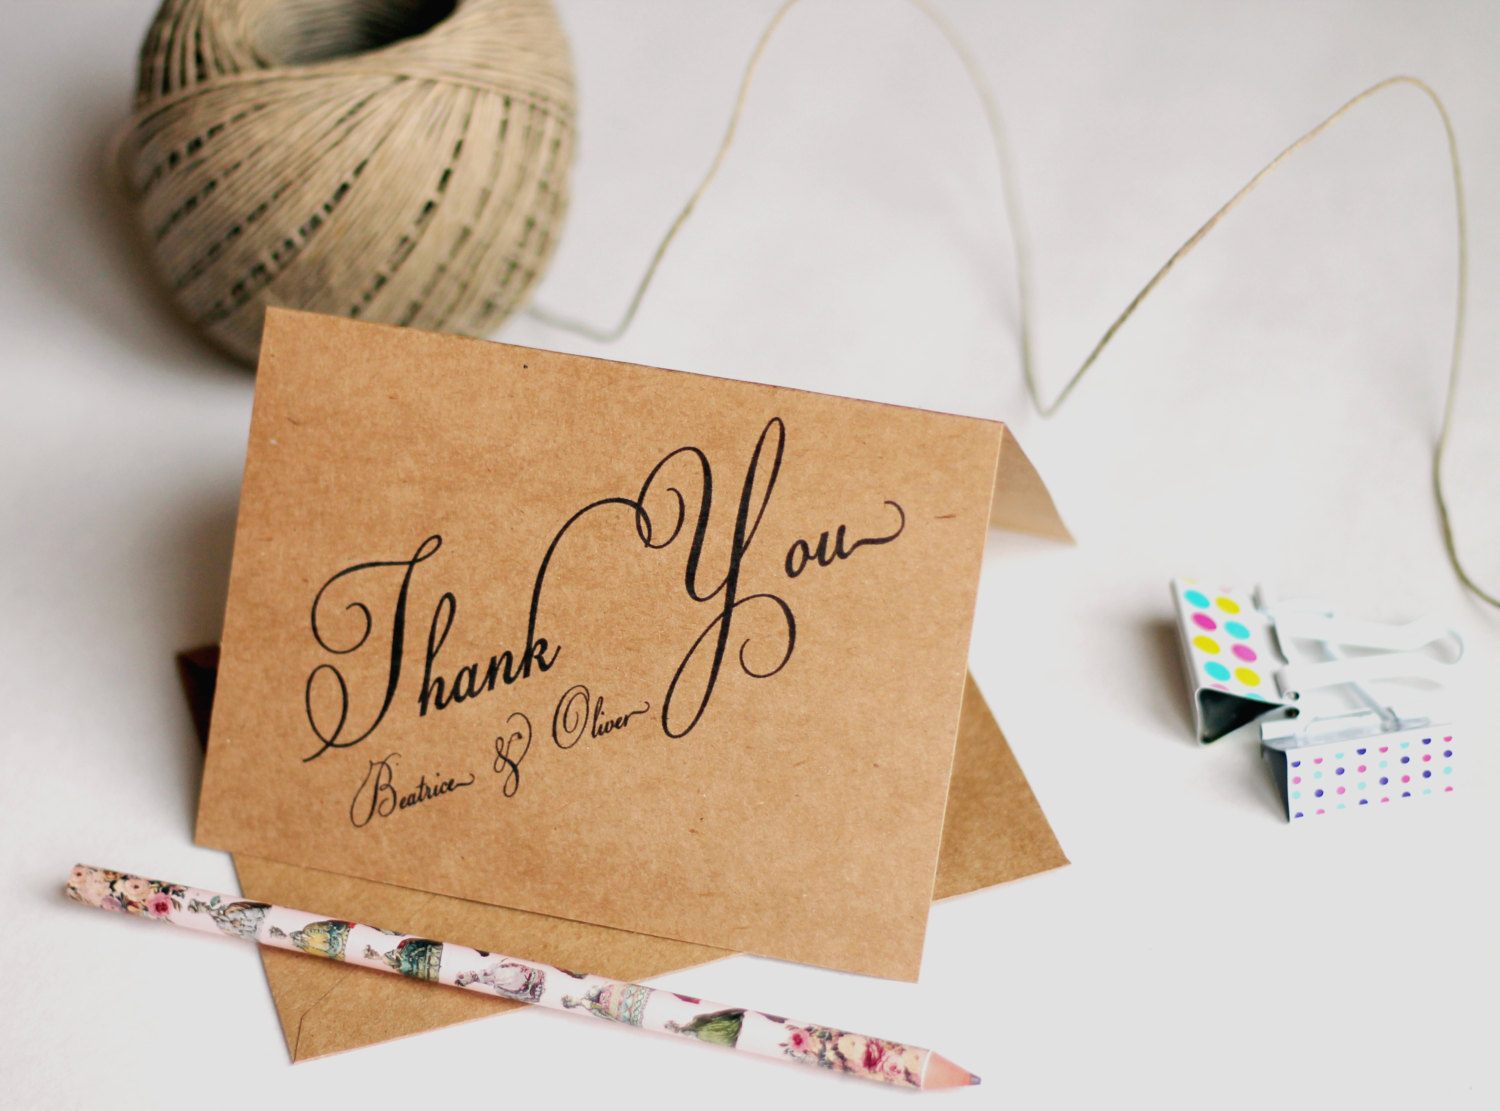 11+ Rustic Thank You Cards | Design Trends - Premium PSD, Vector Downloads